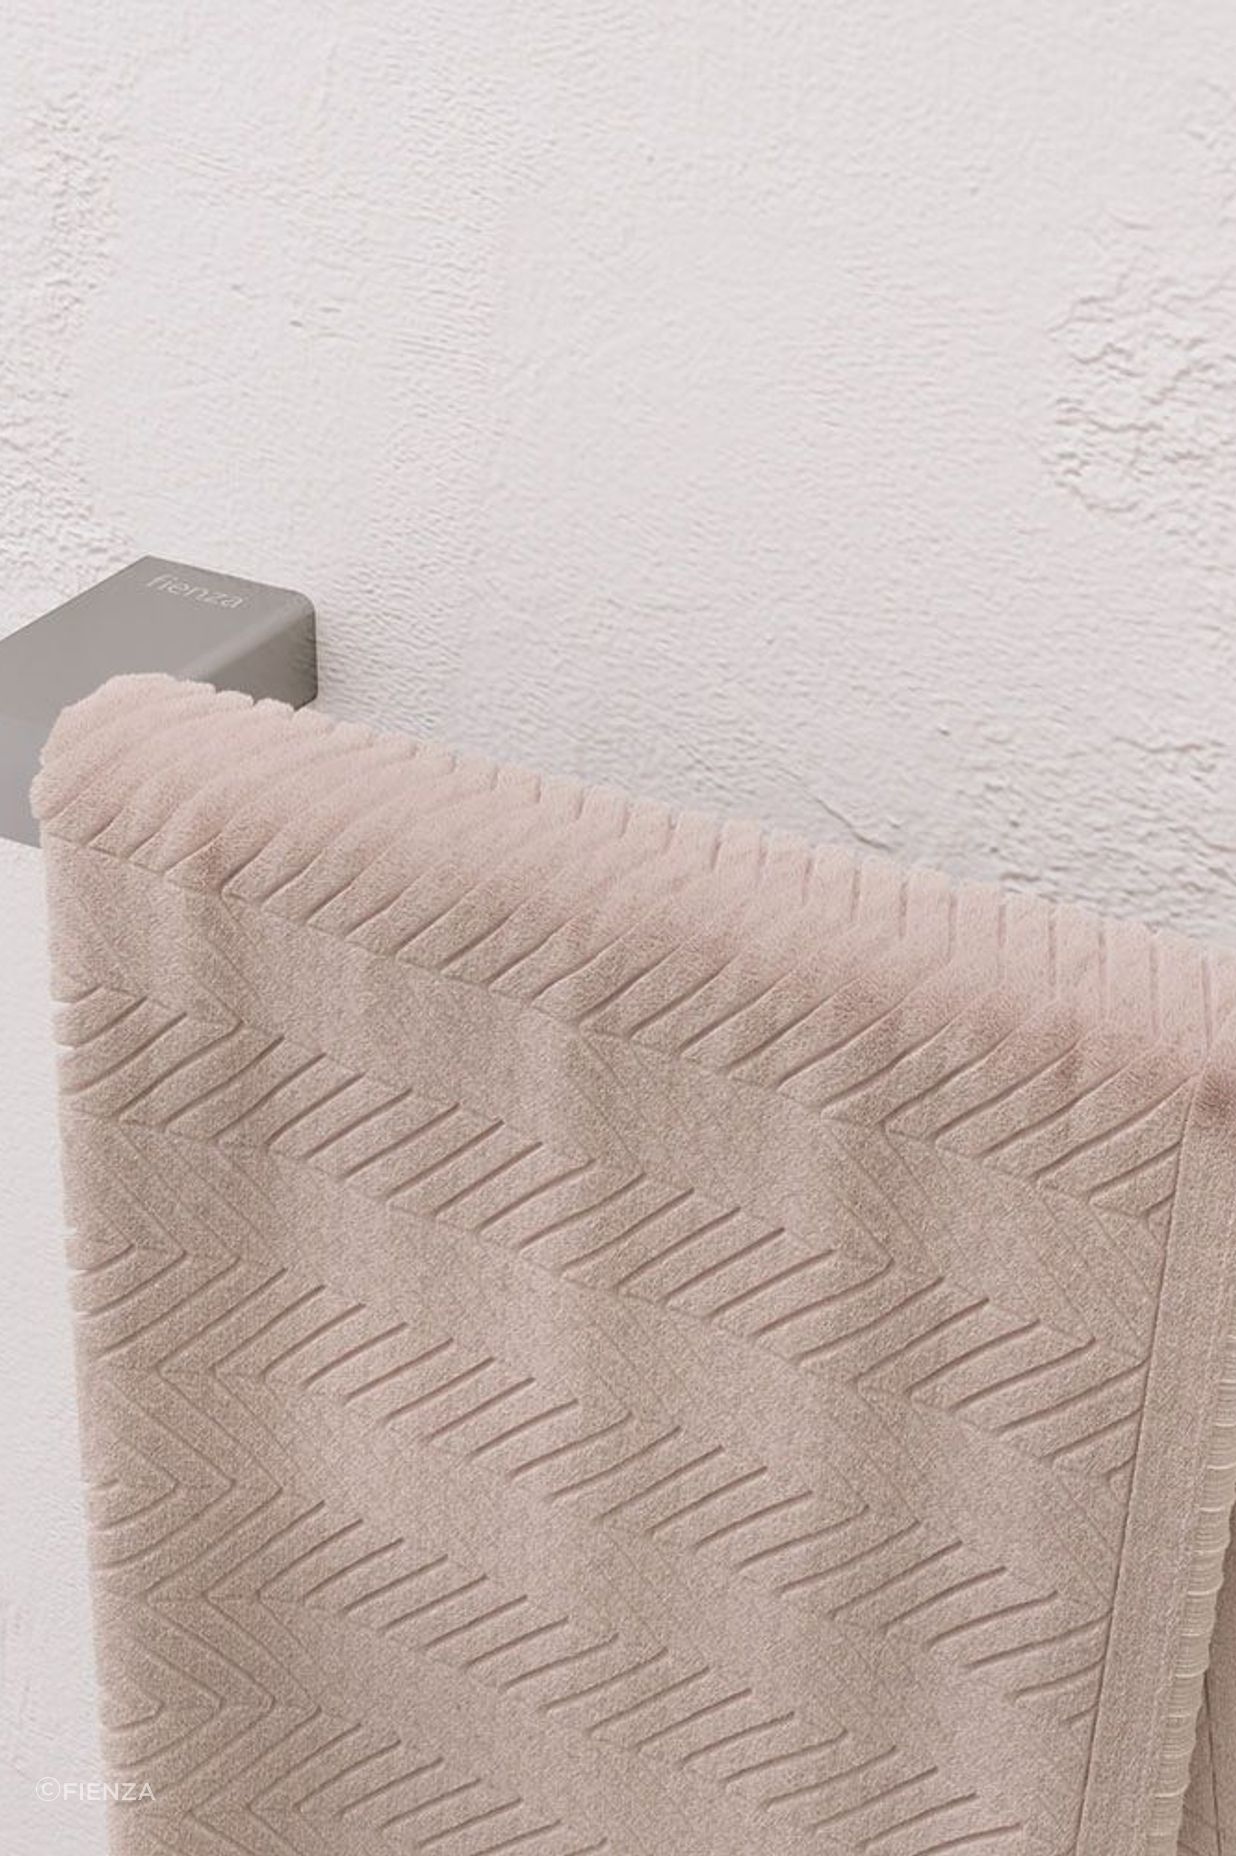 Heated towel rails are a great way to air out your towels and keep them warm.